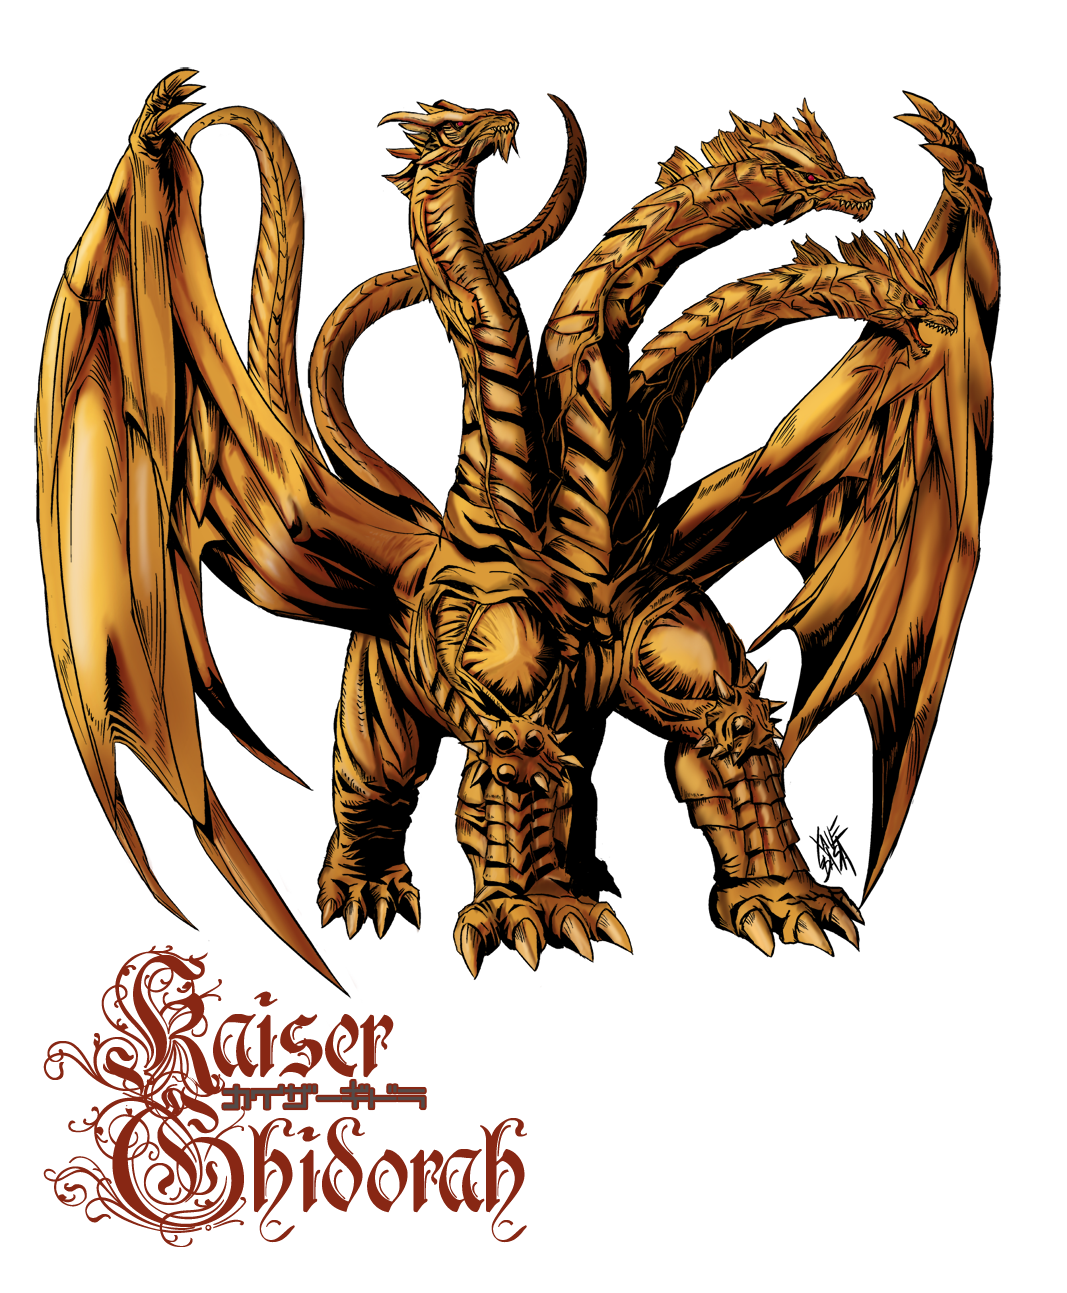 KAISER_GHIDORAH_coloured_by_neurowing.png